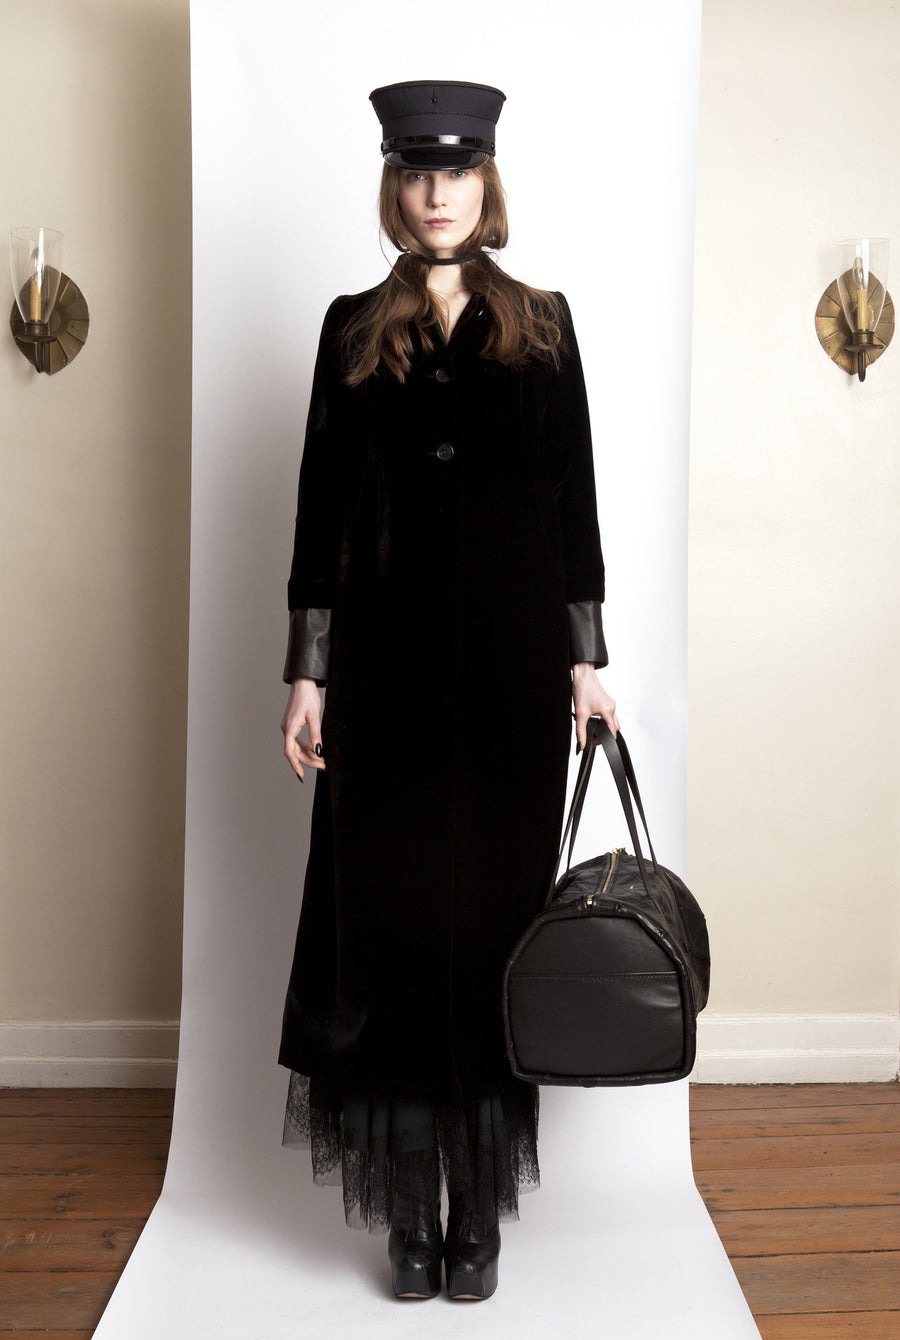 Basia IMG Model Wendy Nichol Clothing Fashion Designer Ready to Wear Fashion Show AW13 Witch Lessons Black Silk Velvet Victorian Coat with Leather Trim Custom Fabric Color Handmade in NYC New York City Custom Tailoring Fitting Size Color Fabric Made to Measure goth gothic edwardian Triangle patchwork travel bag victorian slip dress lace trim